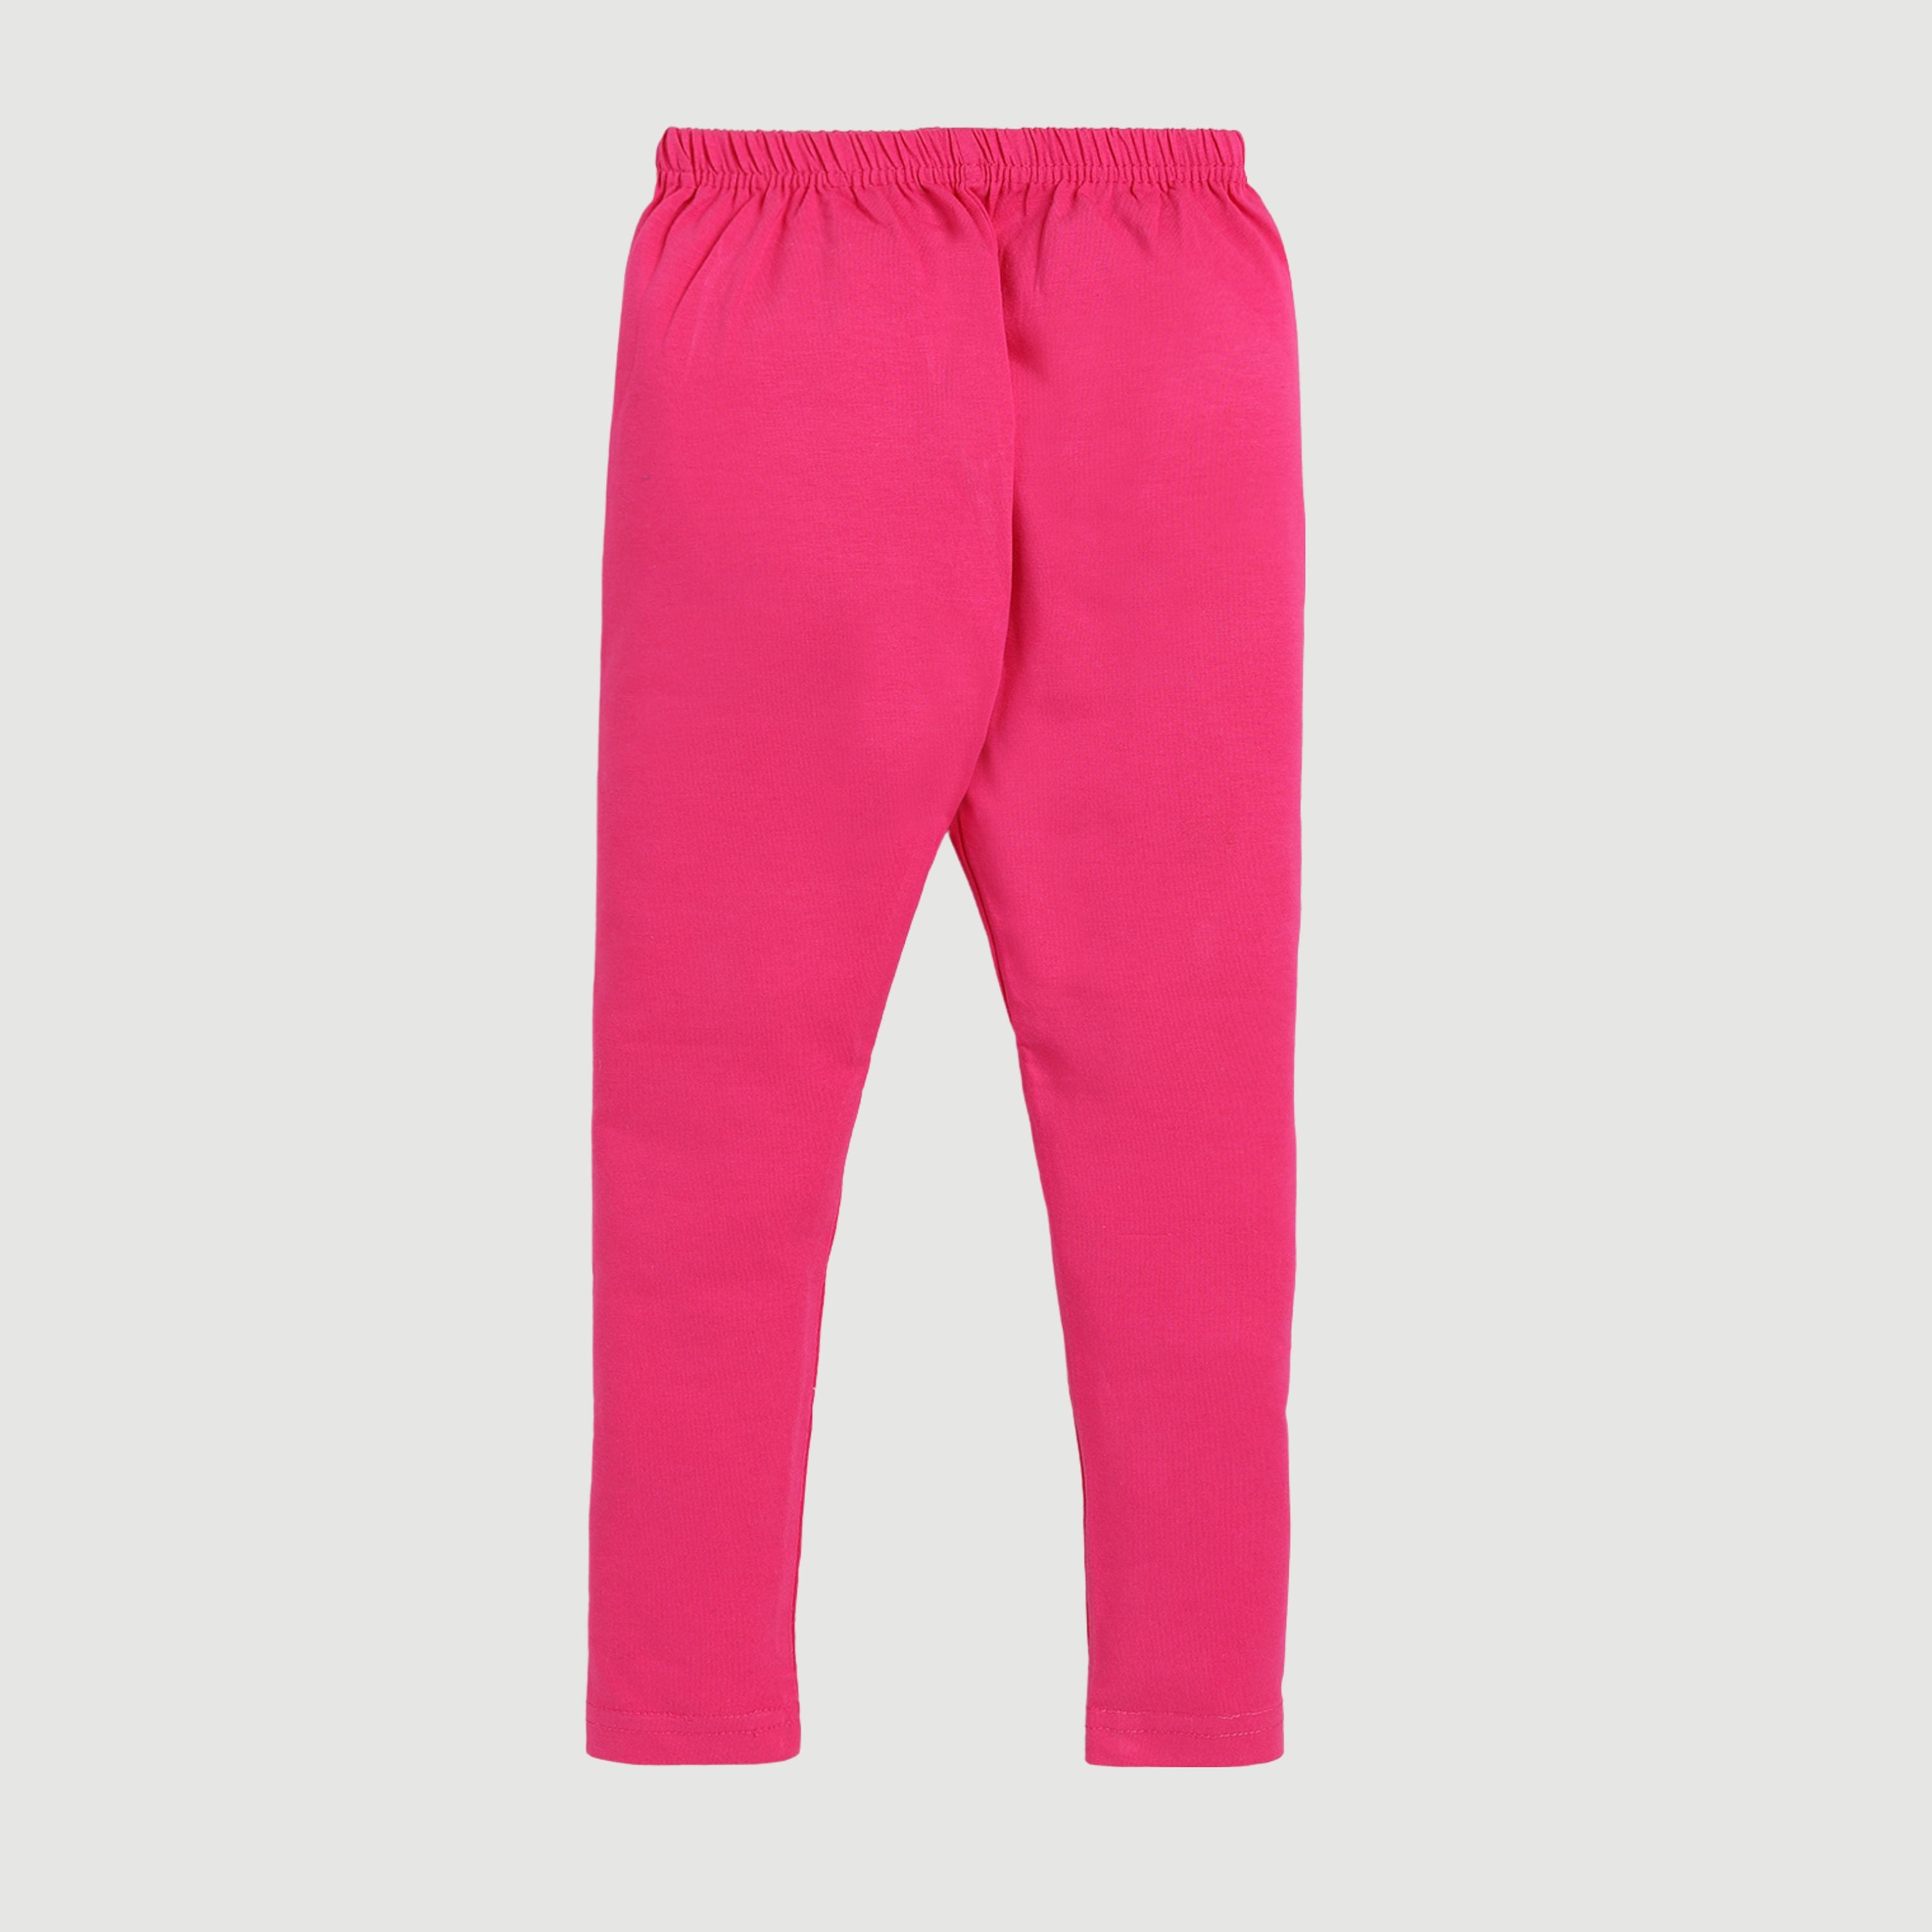 Stretchable Leggings For Girl's - HOT PINK